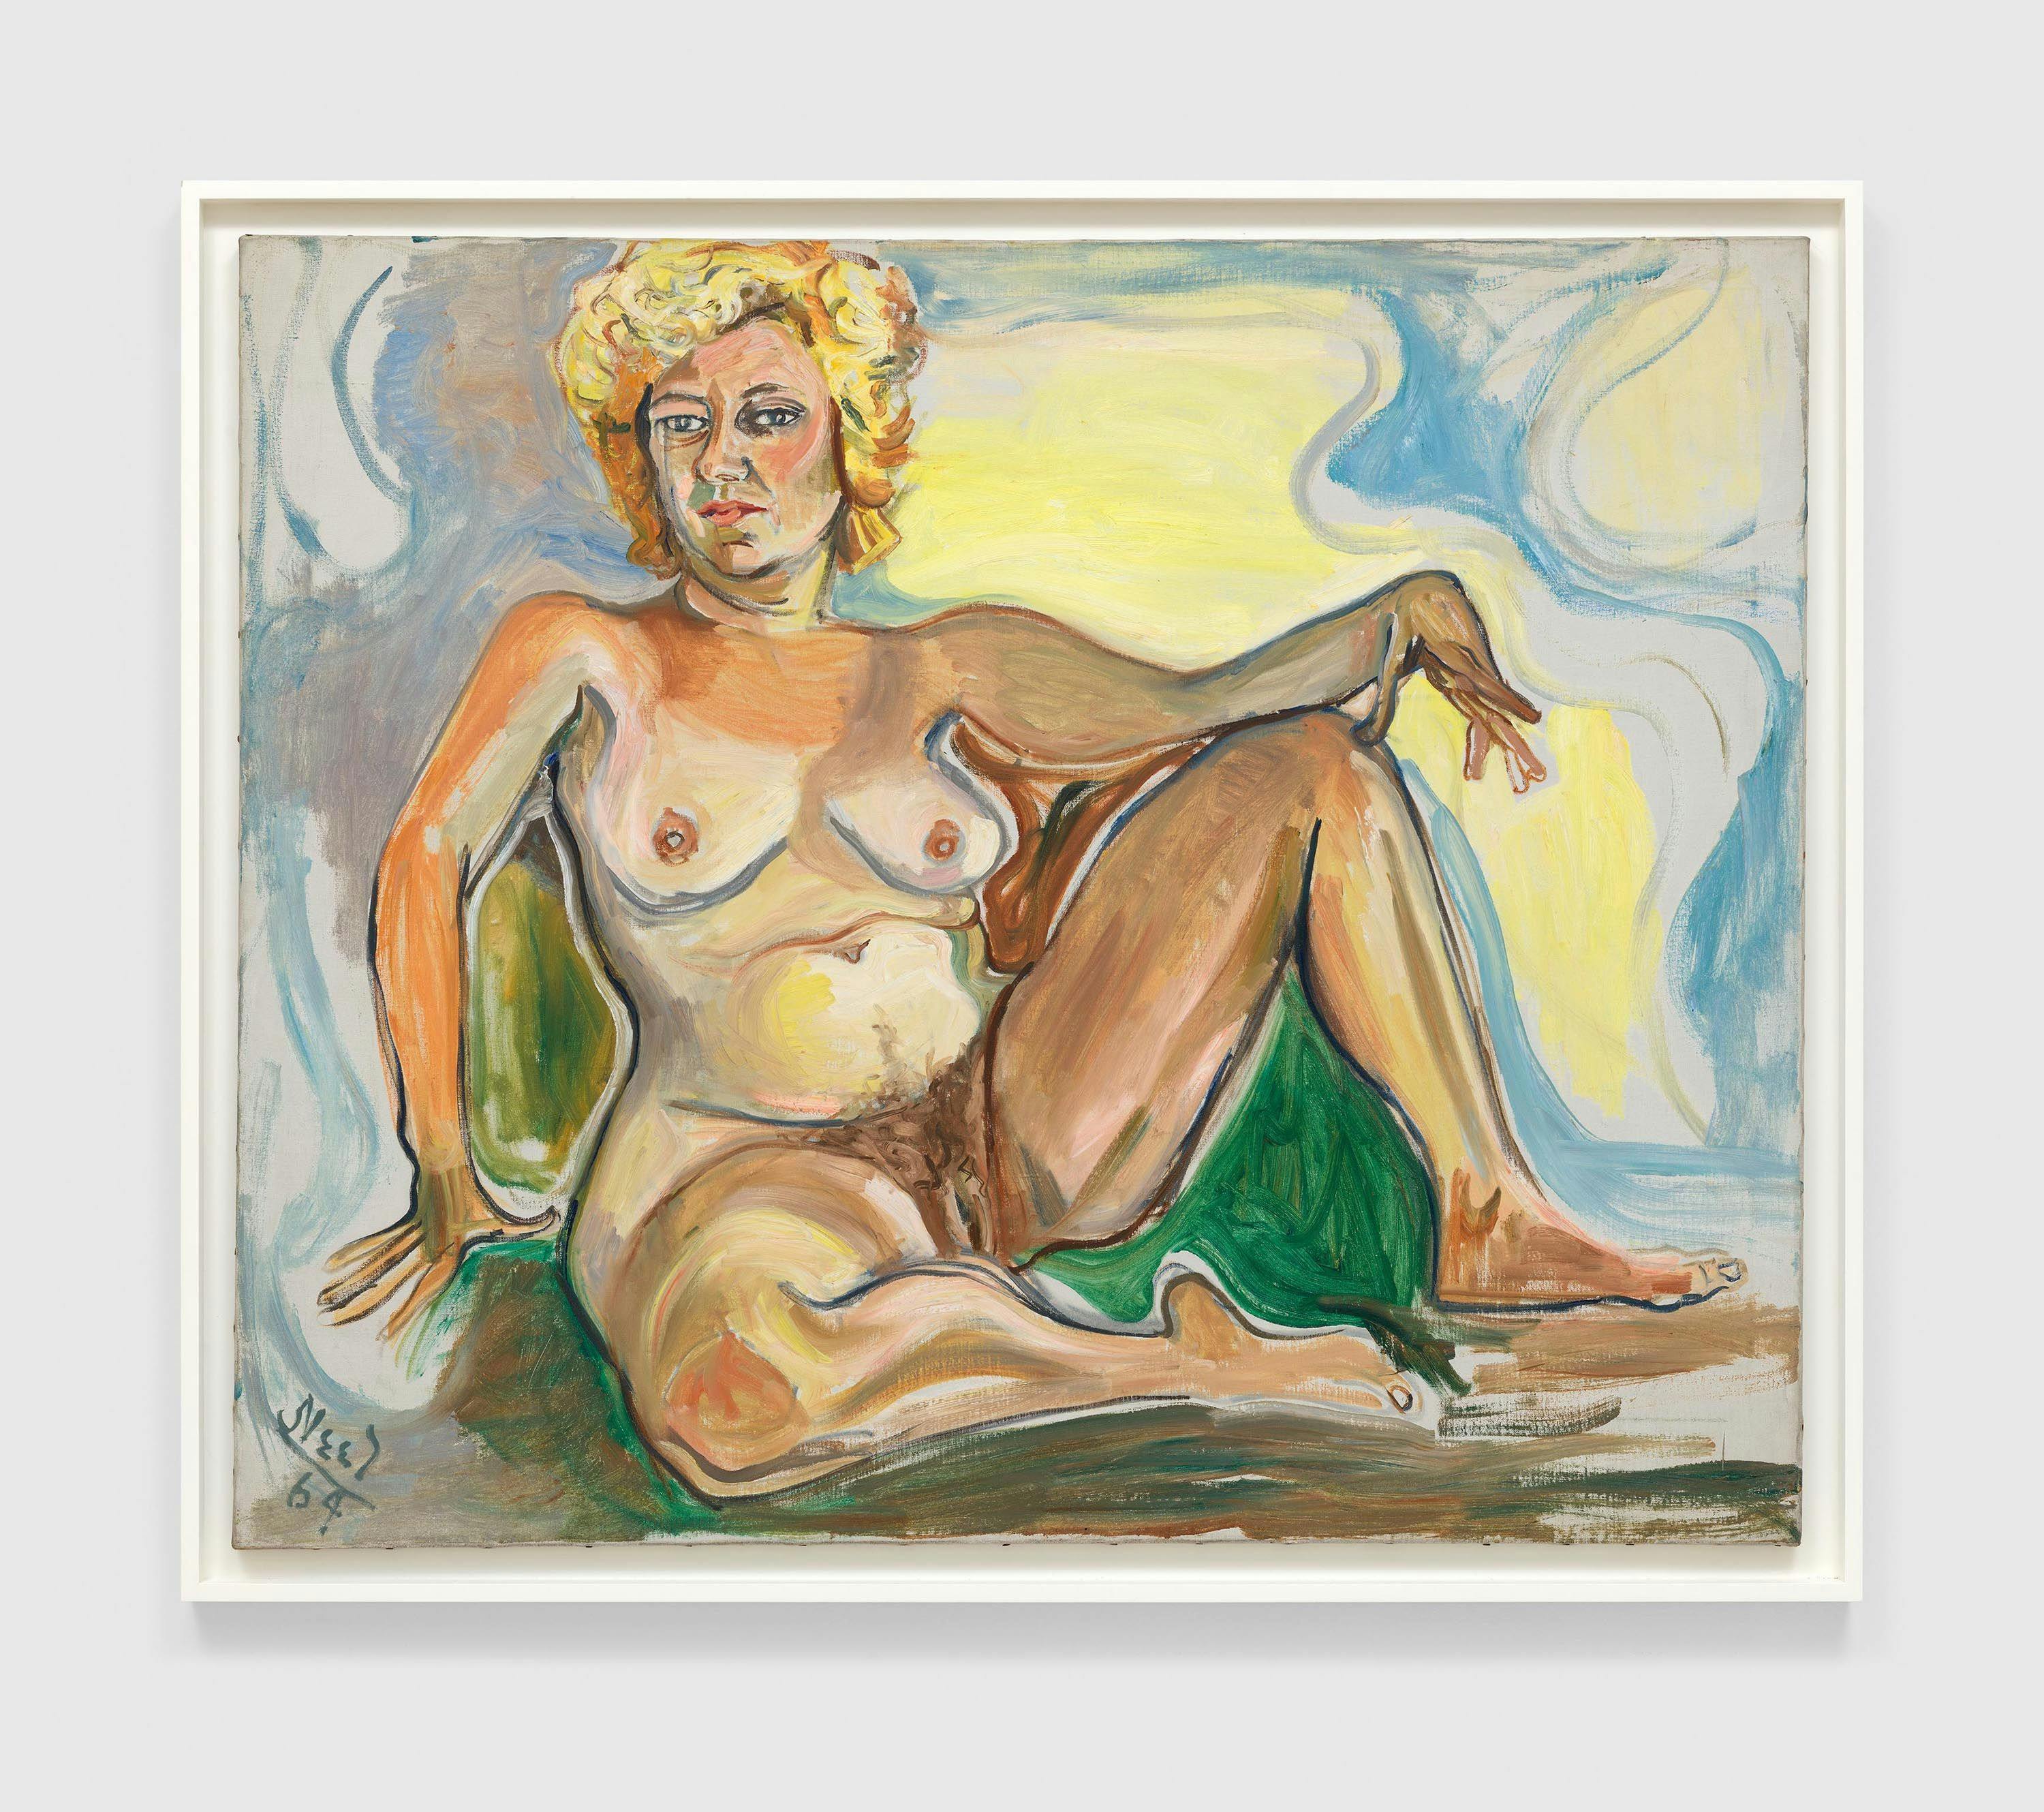 A painting by Alice Neel, titled Ruth Nude, dated 1964.